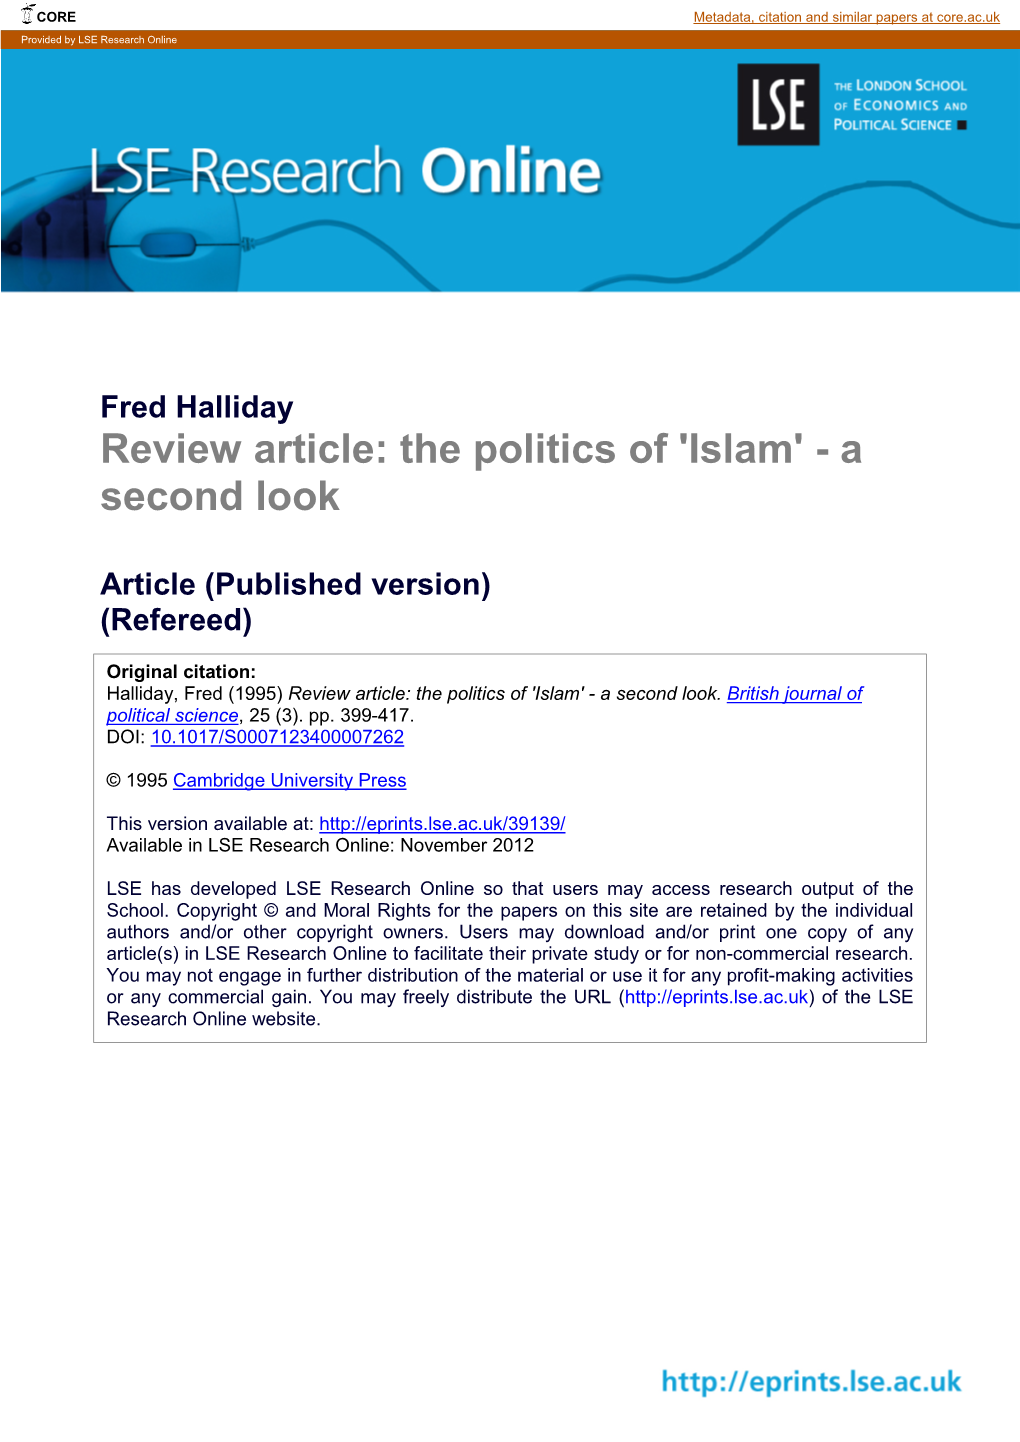 Review Article: the Politics of 'Islam' - a Second Look